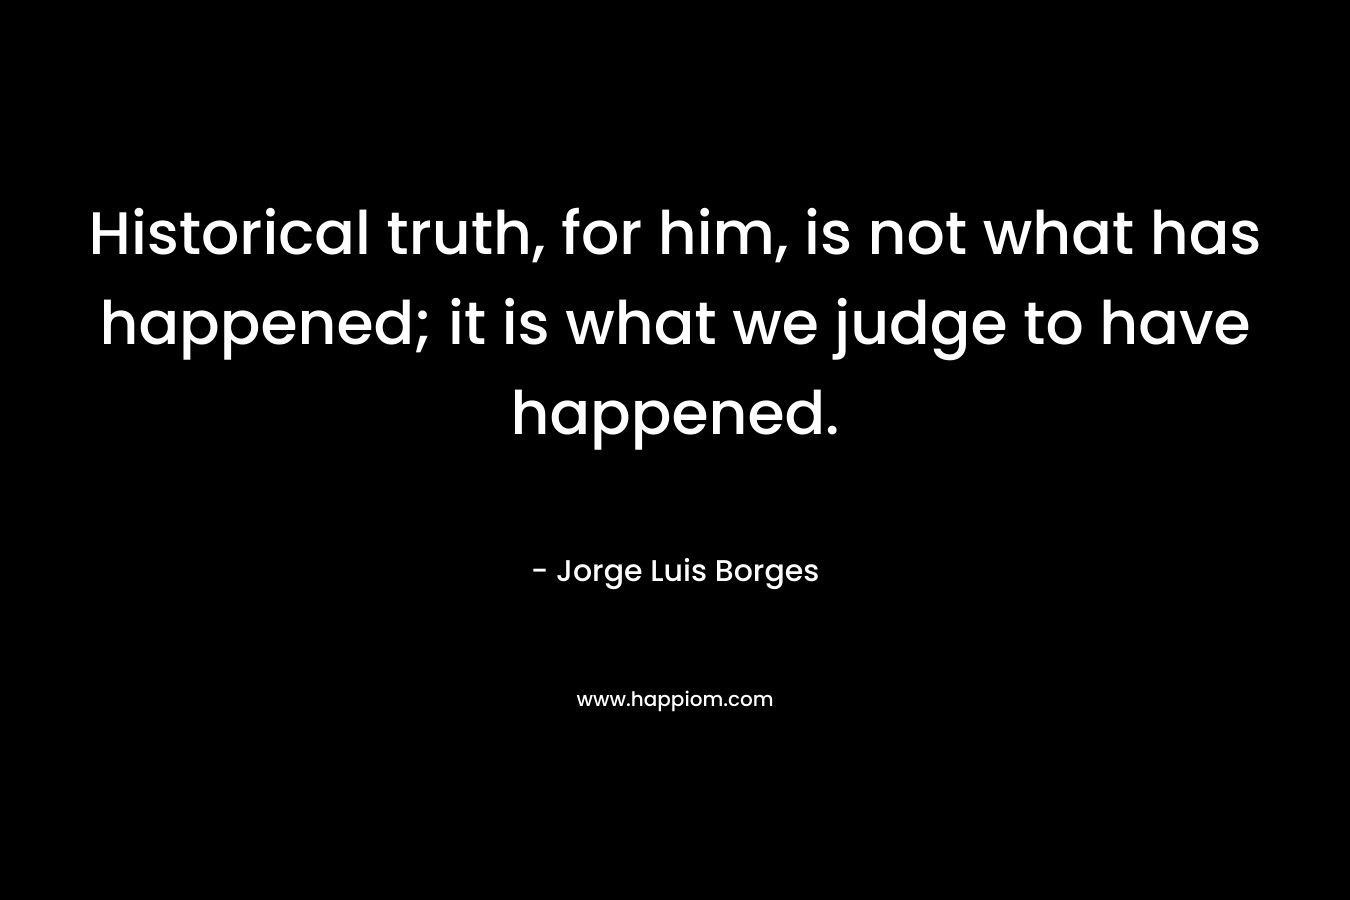 Historical truth, for him, is not what has happened; it is what we judge to have happened.